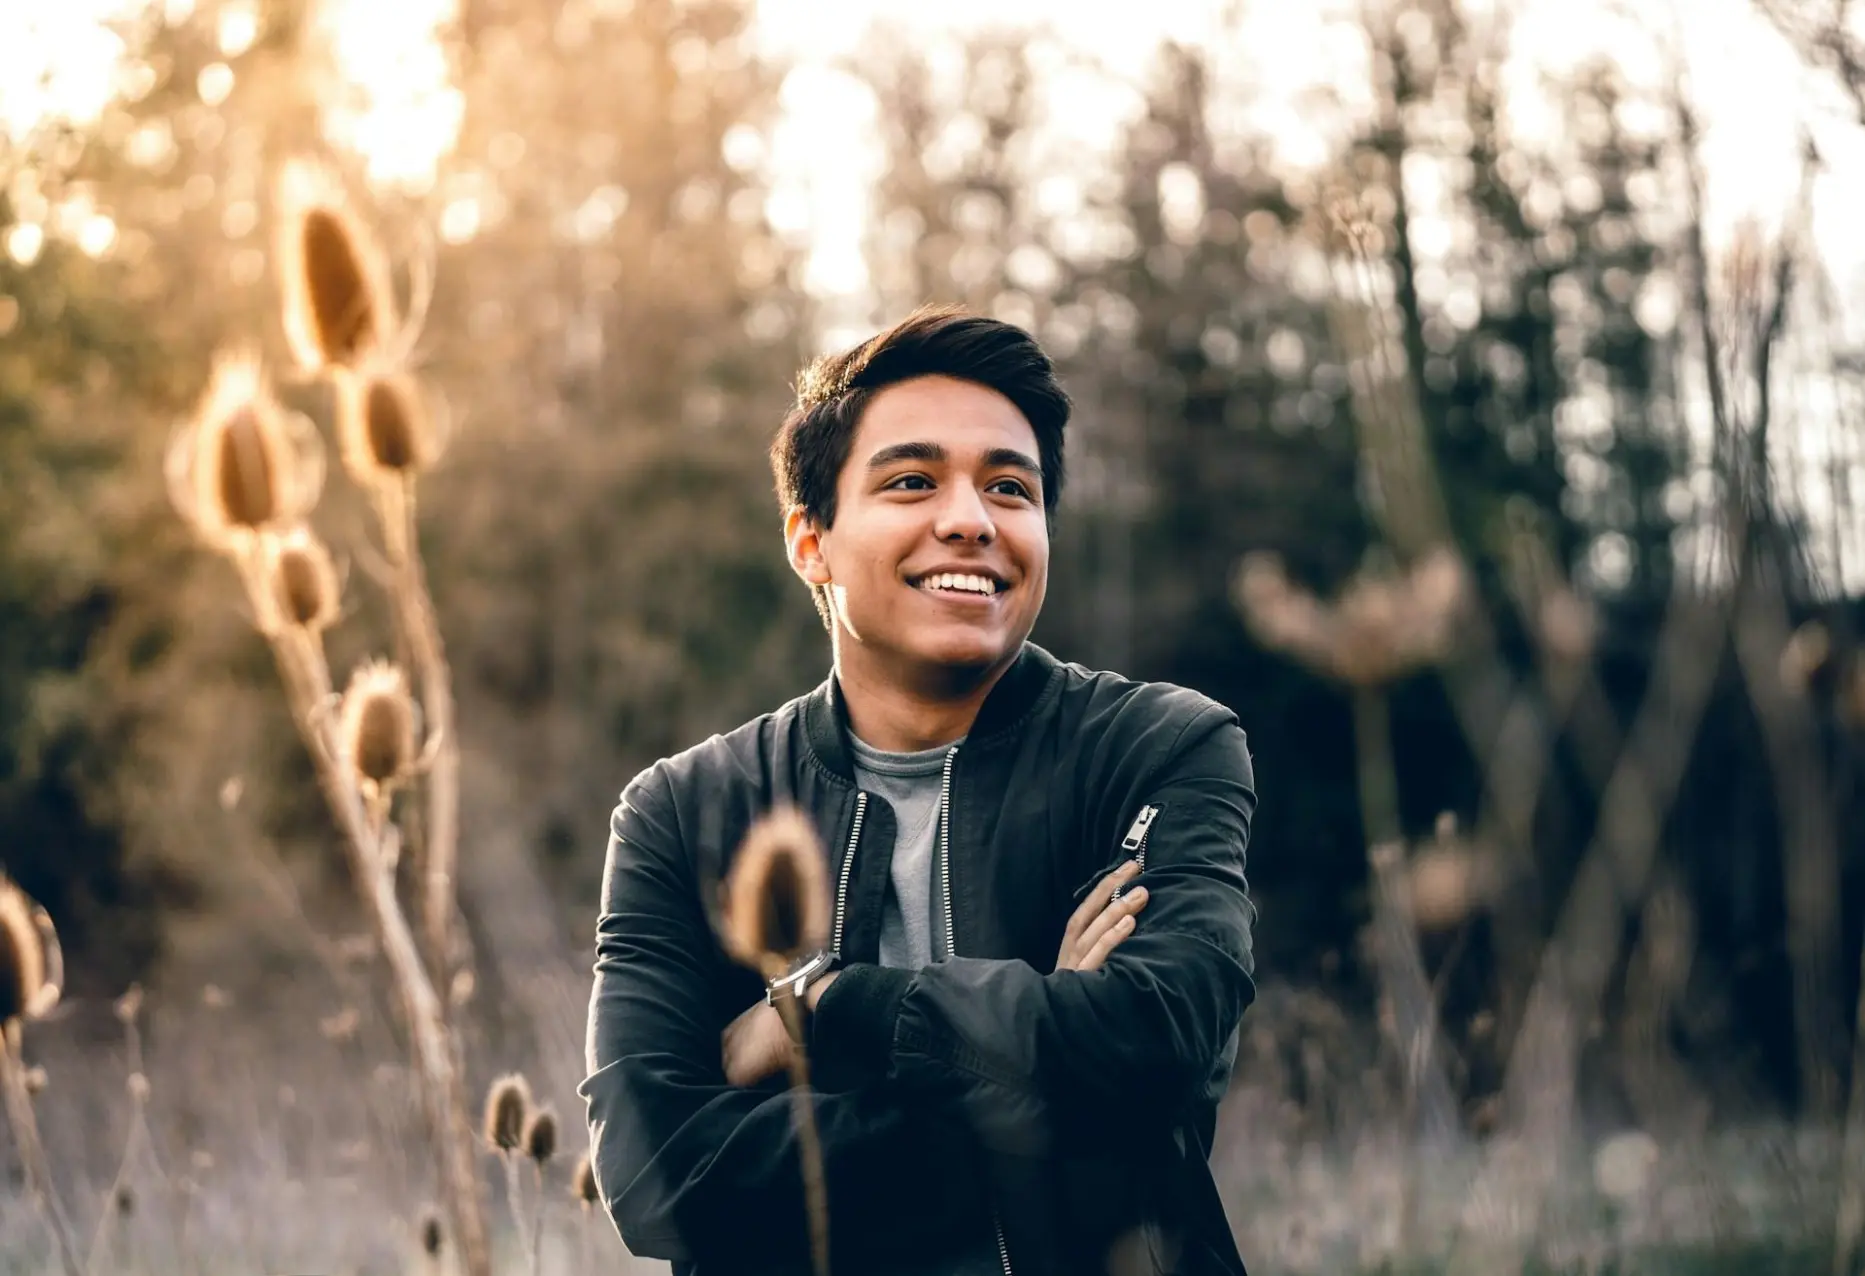 Smiling man in a field